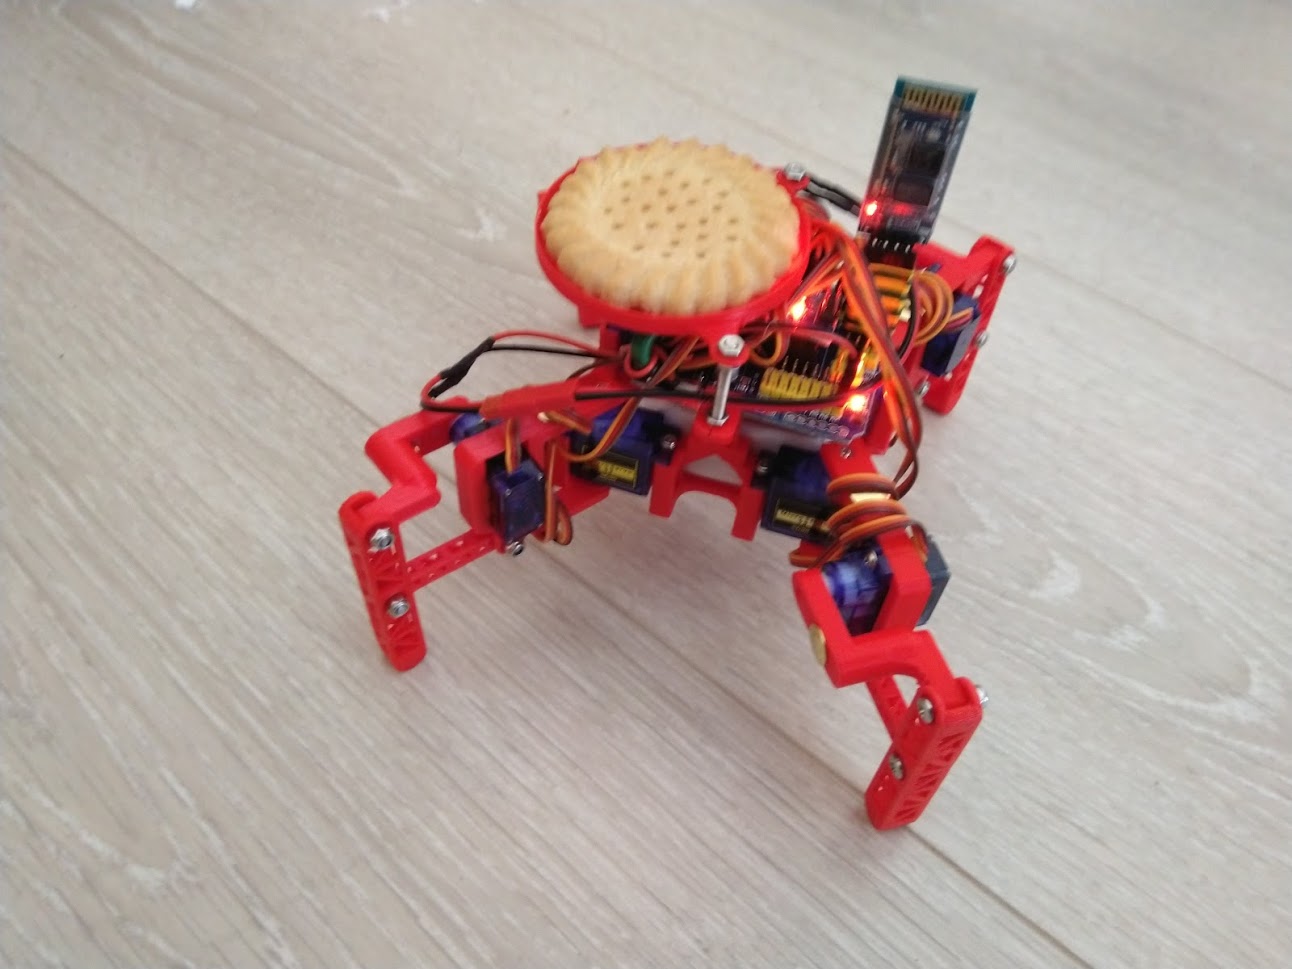 V3 spider robot with a biscuit